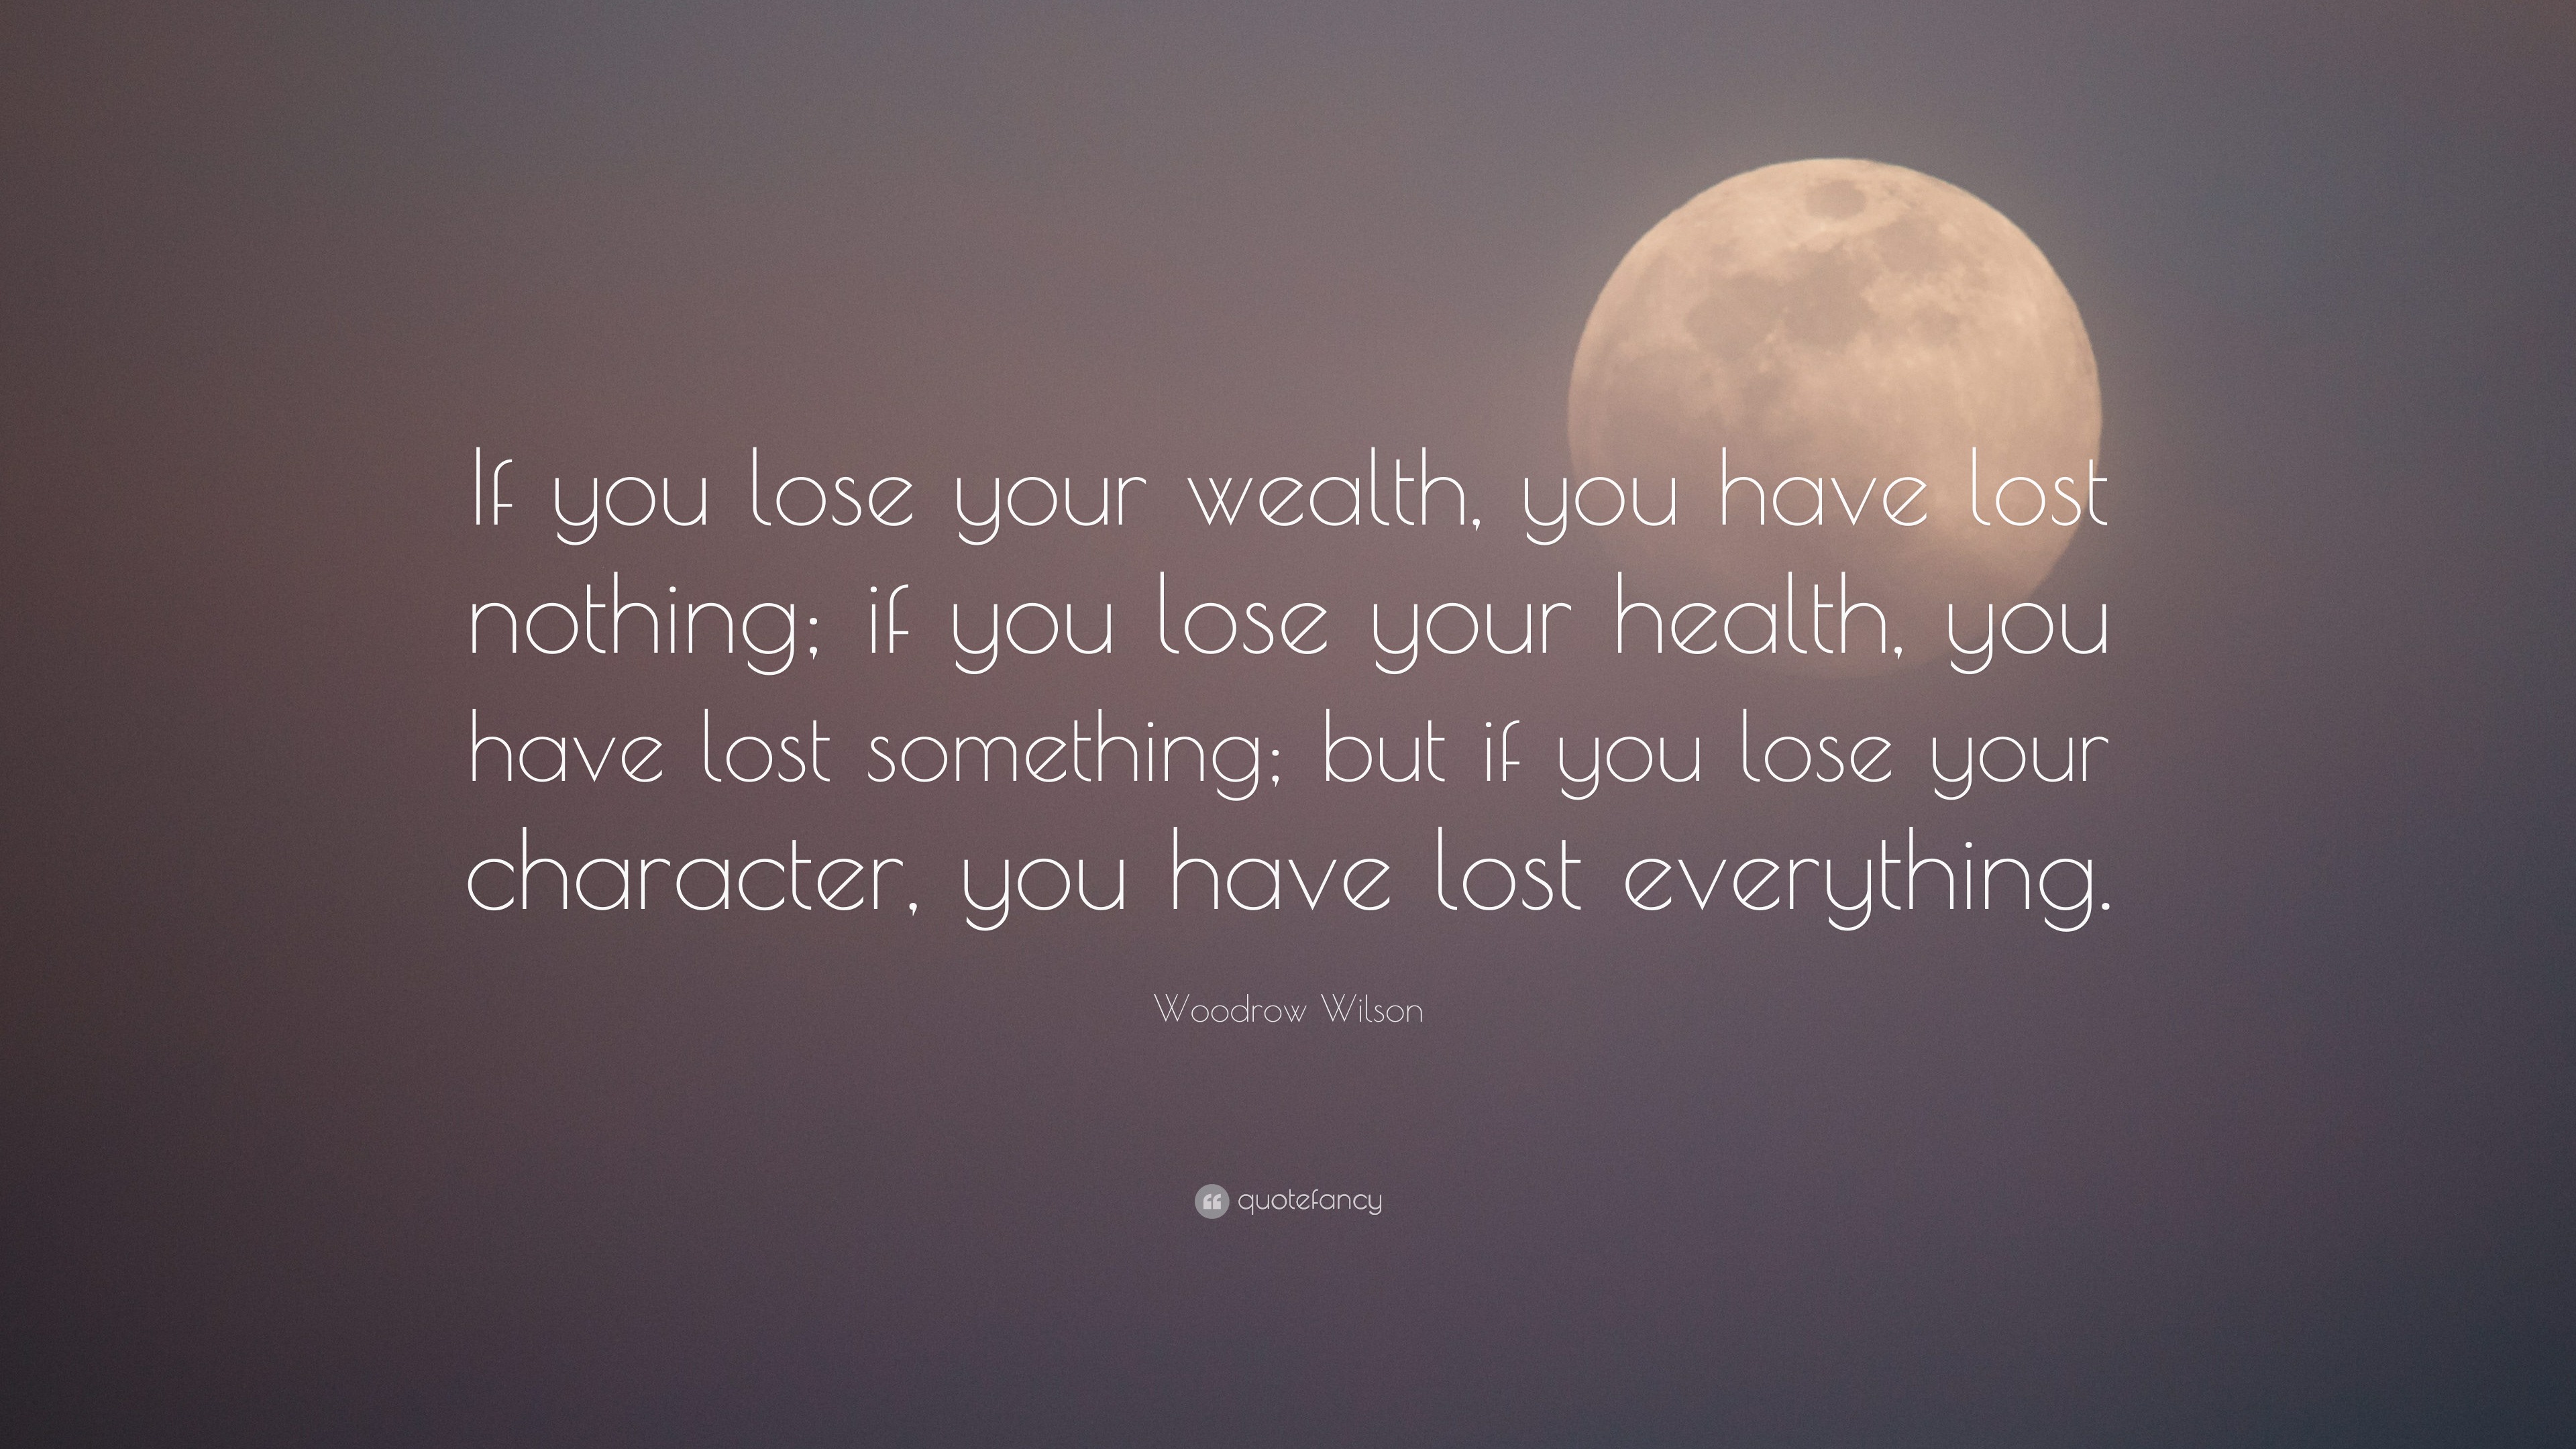 Woodrow Wilson Quote: “If you lose your wealth, you have lost nothing ...